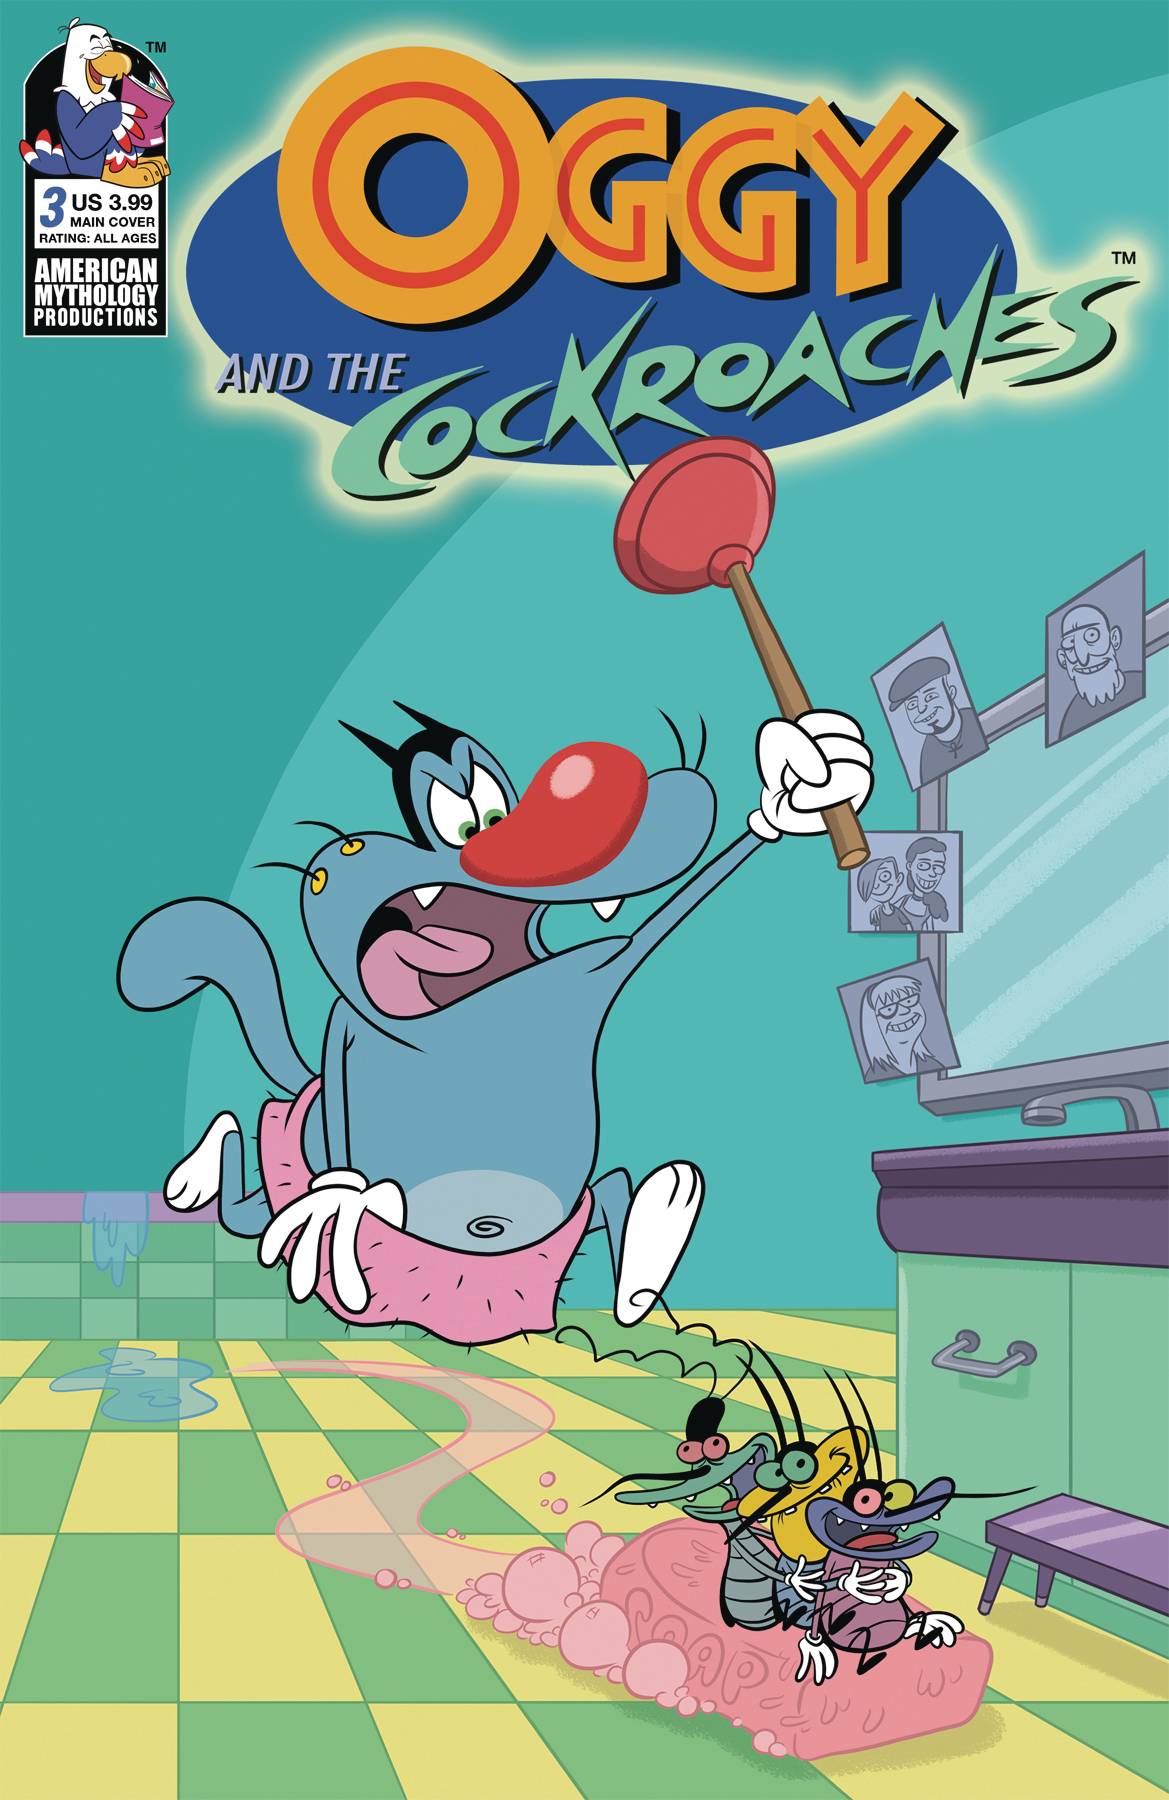 Oggy & The Cockroaches #3 (2020)